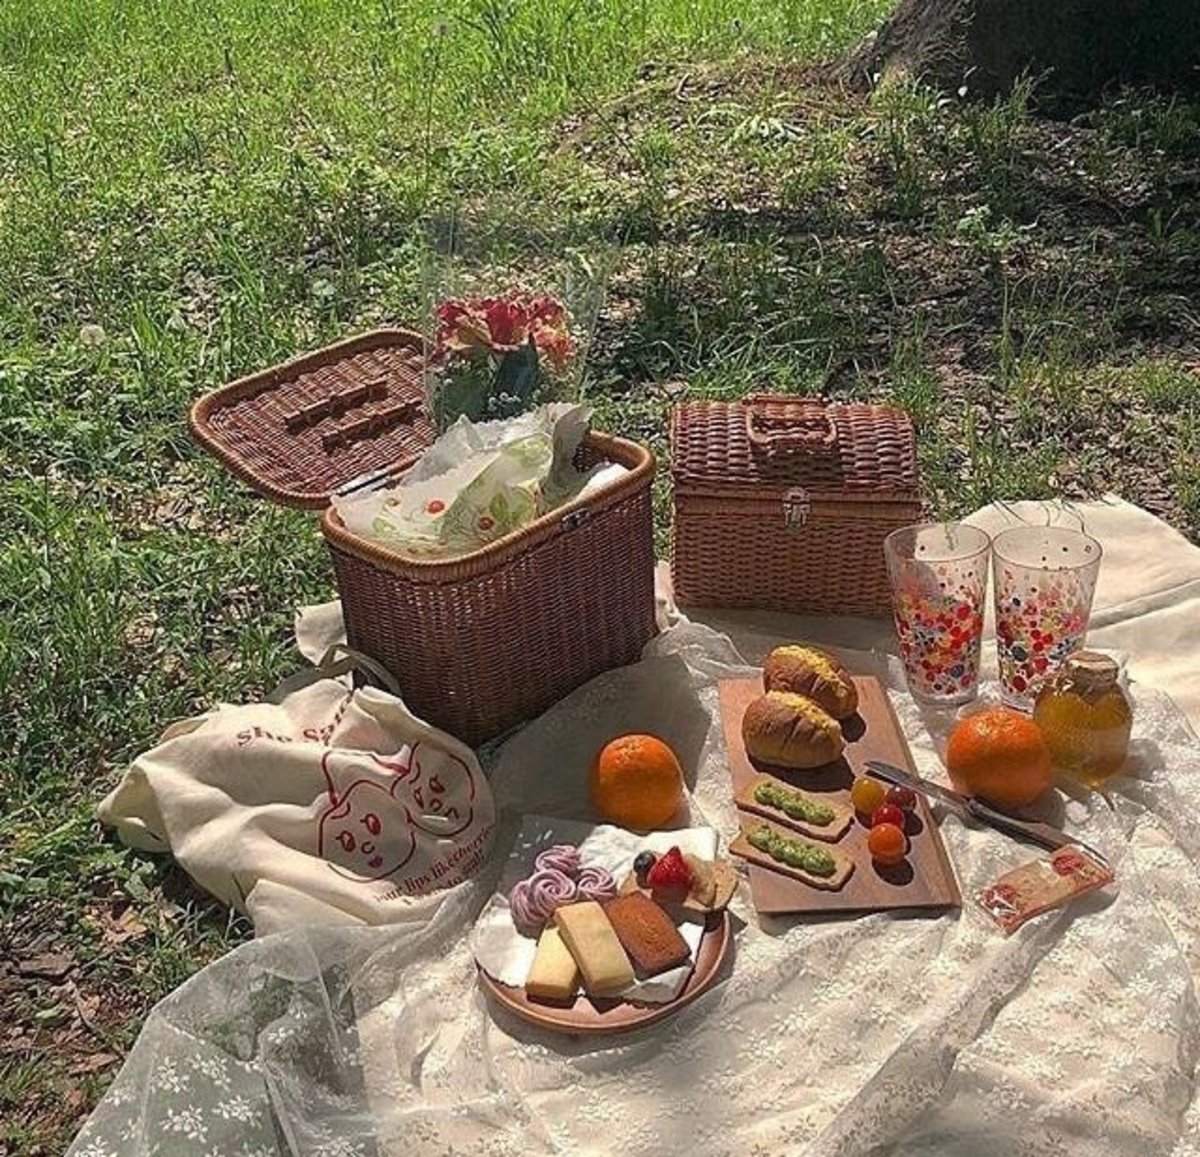 a-picnic-with-friends-a-short-storytale